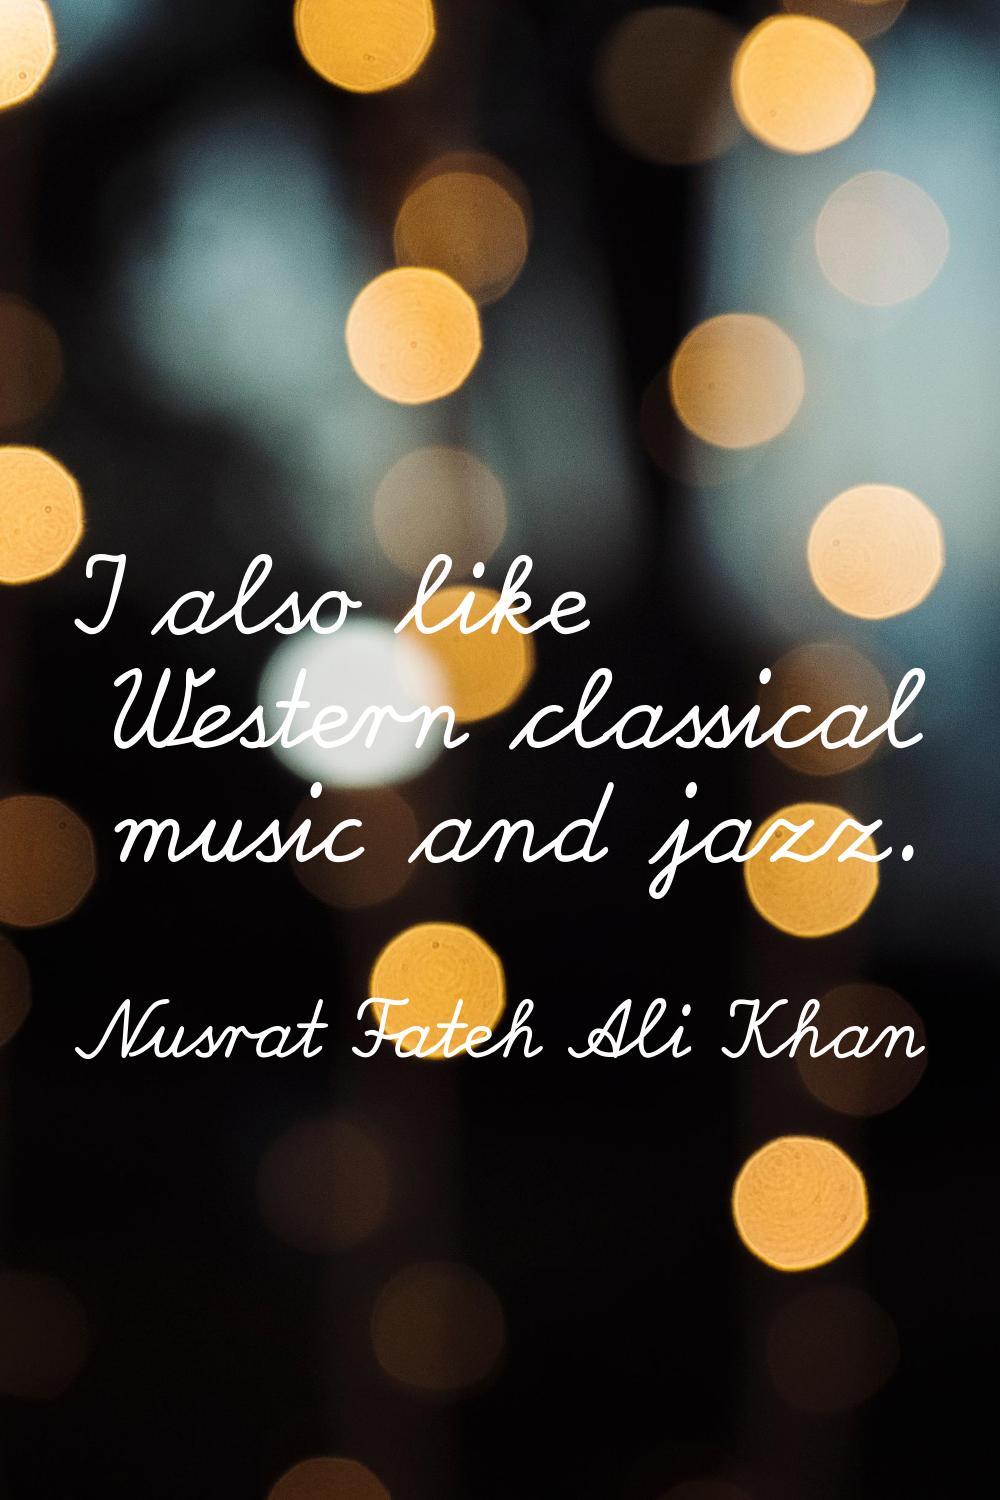 I also like Western classical music and jazz.